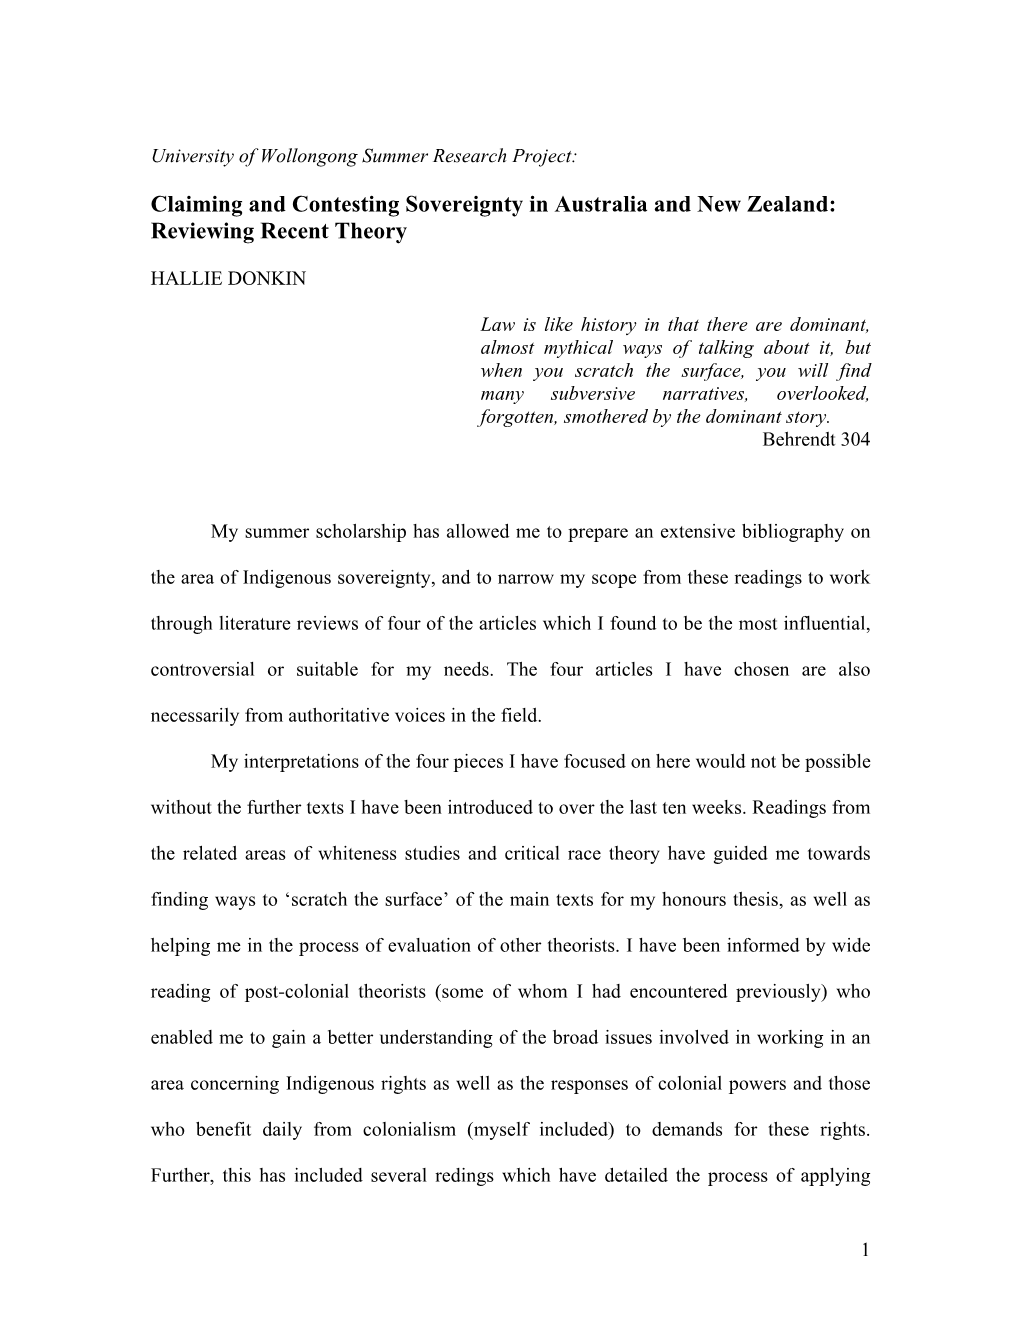 Claiming and Contesting Sovereignty in Australia and New Zealand: Reviewing Recent Theory